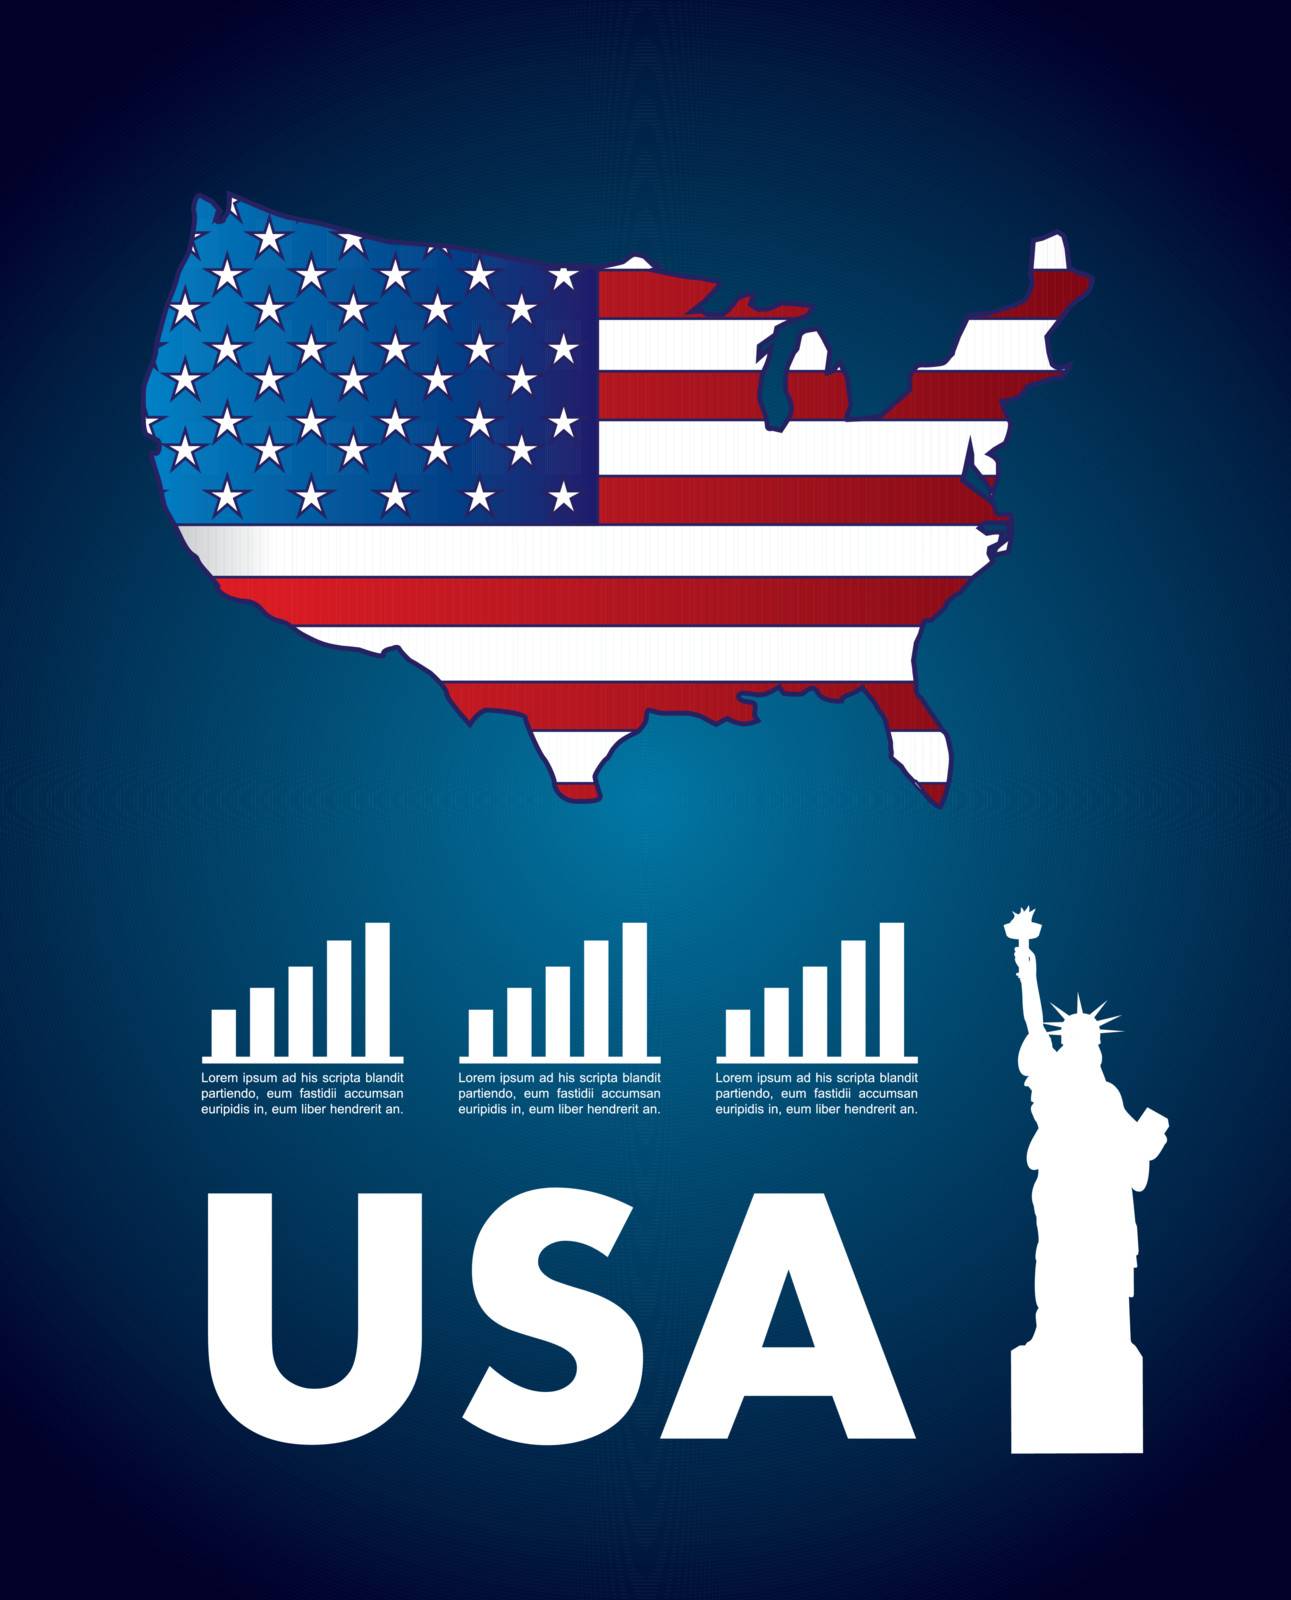 USA icons over blue background vector illustration